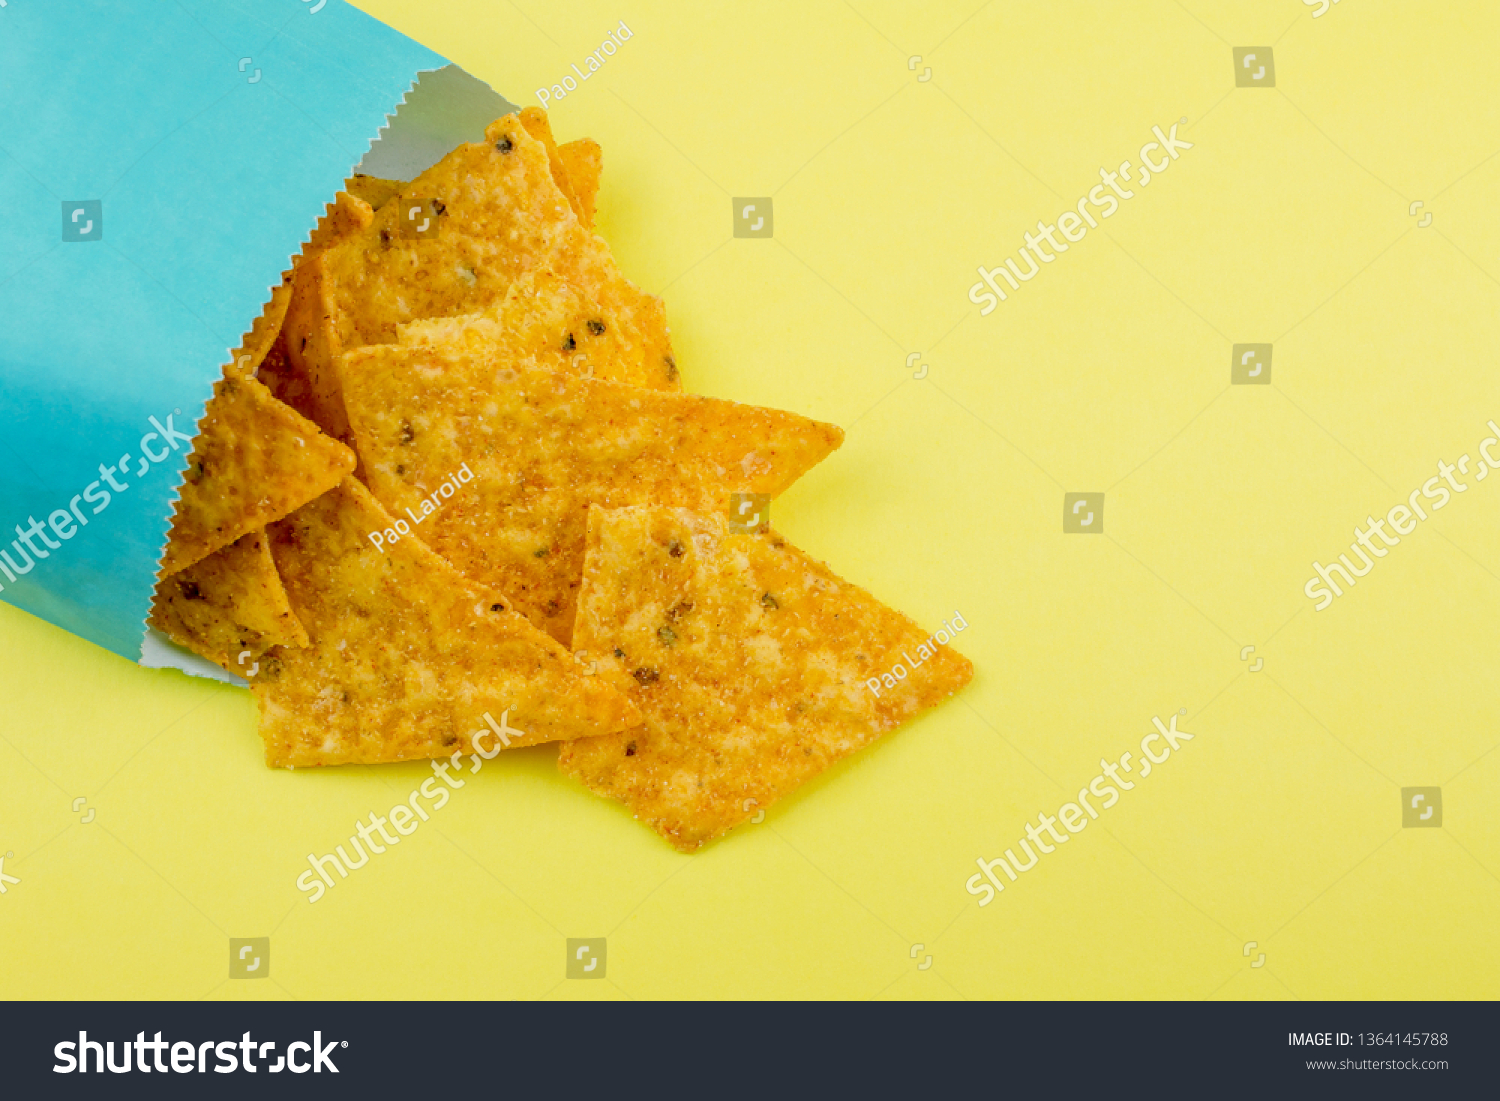 Download Nachos Chips On Yellow Paper Background Education Stock Image 1364145788 PSD Mockup Templates